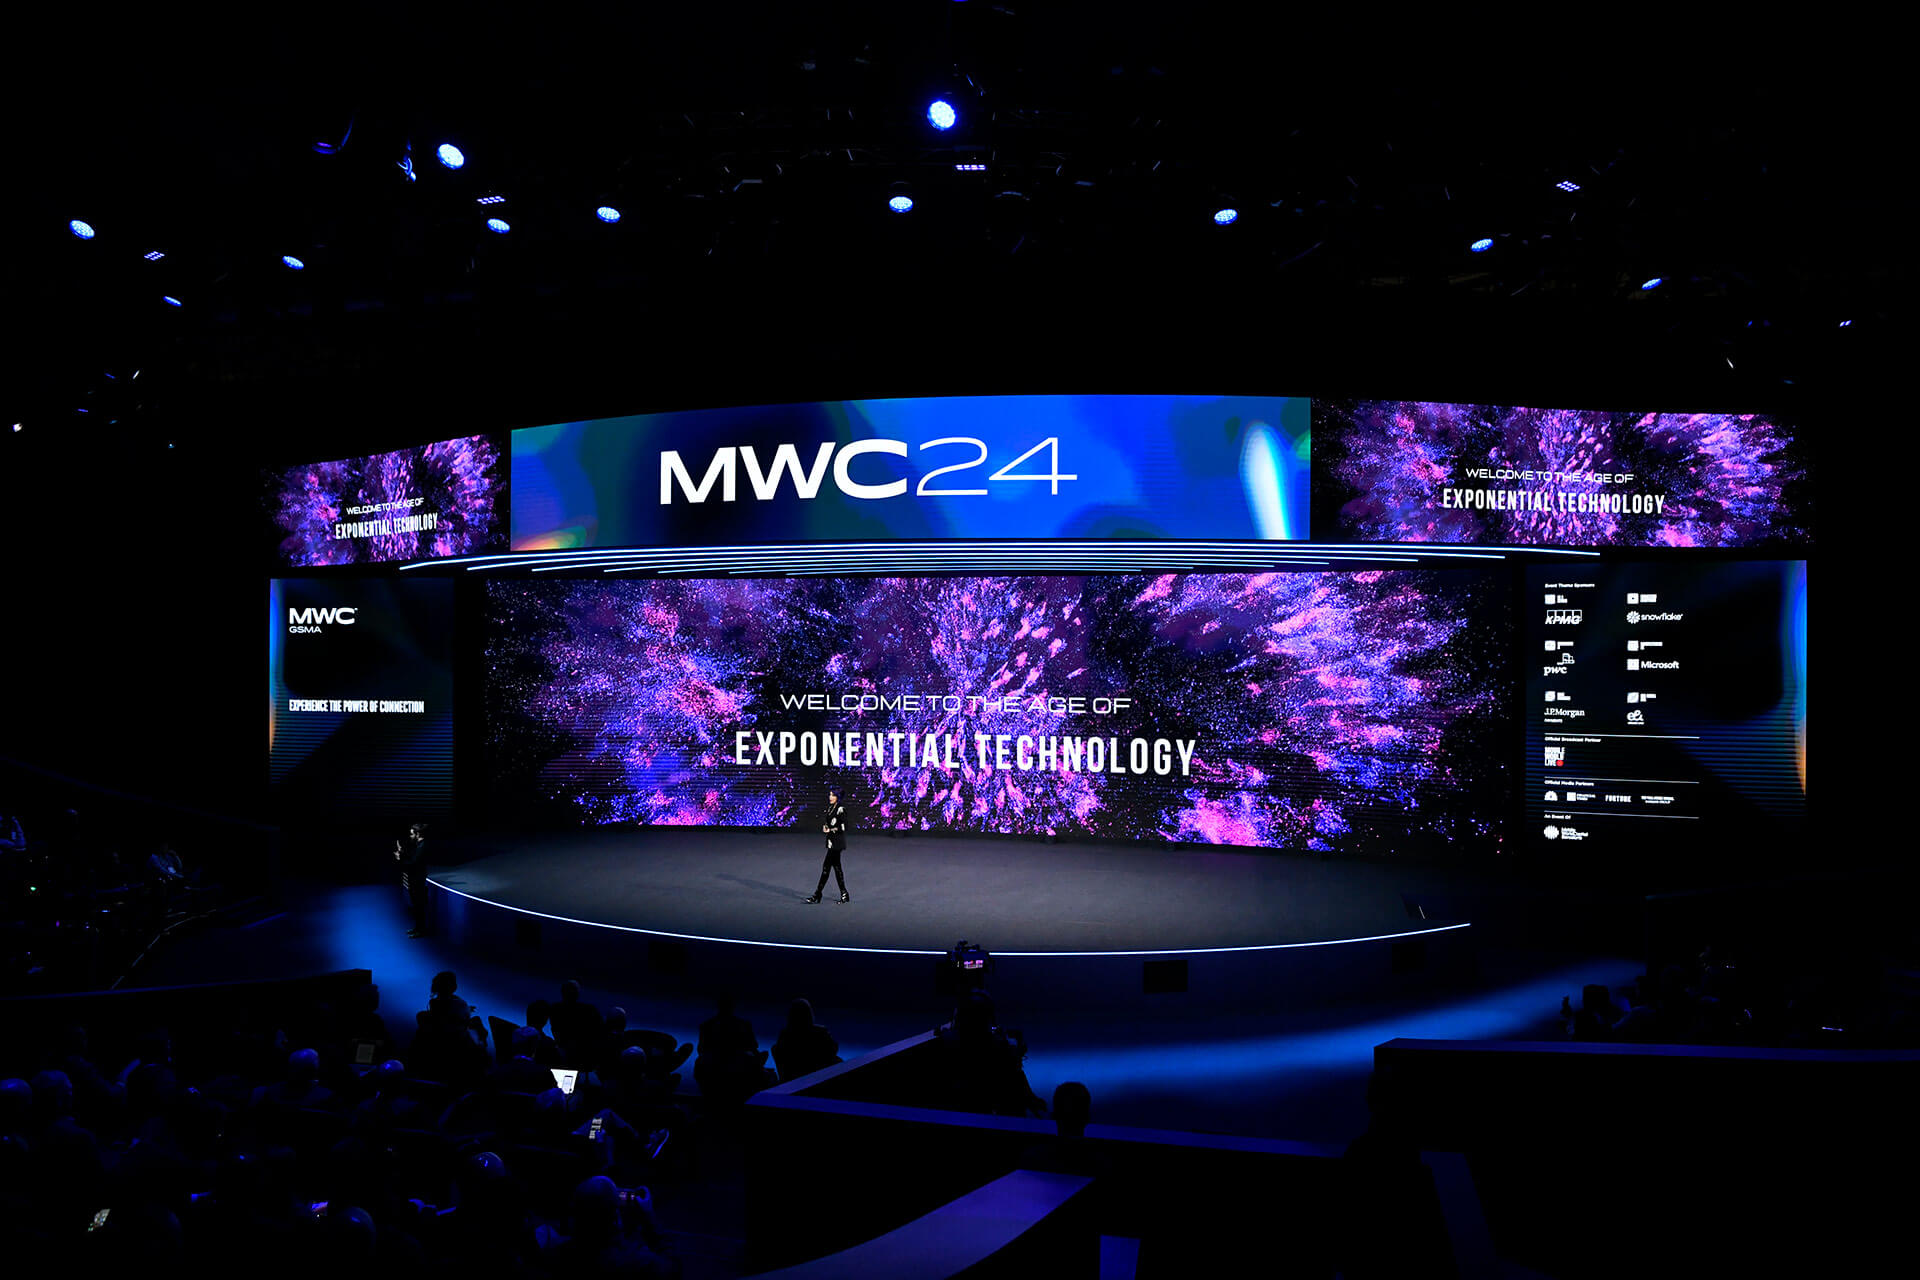 Digital health at MWC 2024 has been an important topic of interest, debate, analysis and innovation in the latest edition of the Mobile World Congress (MWC)